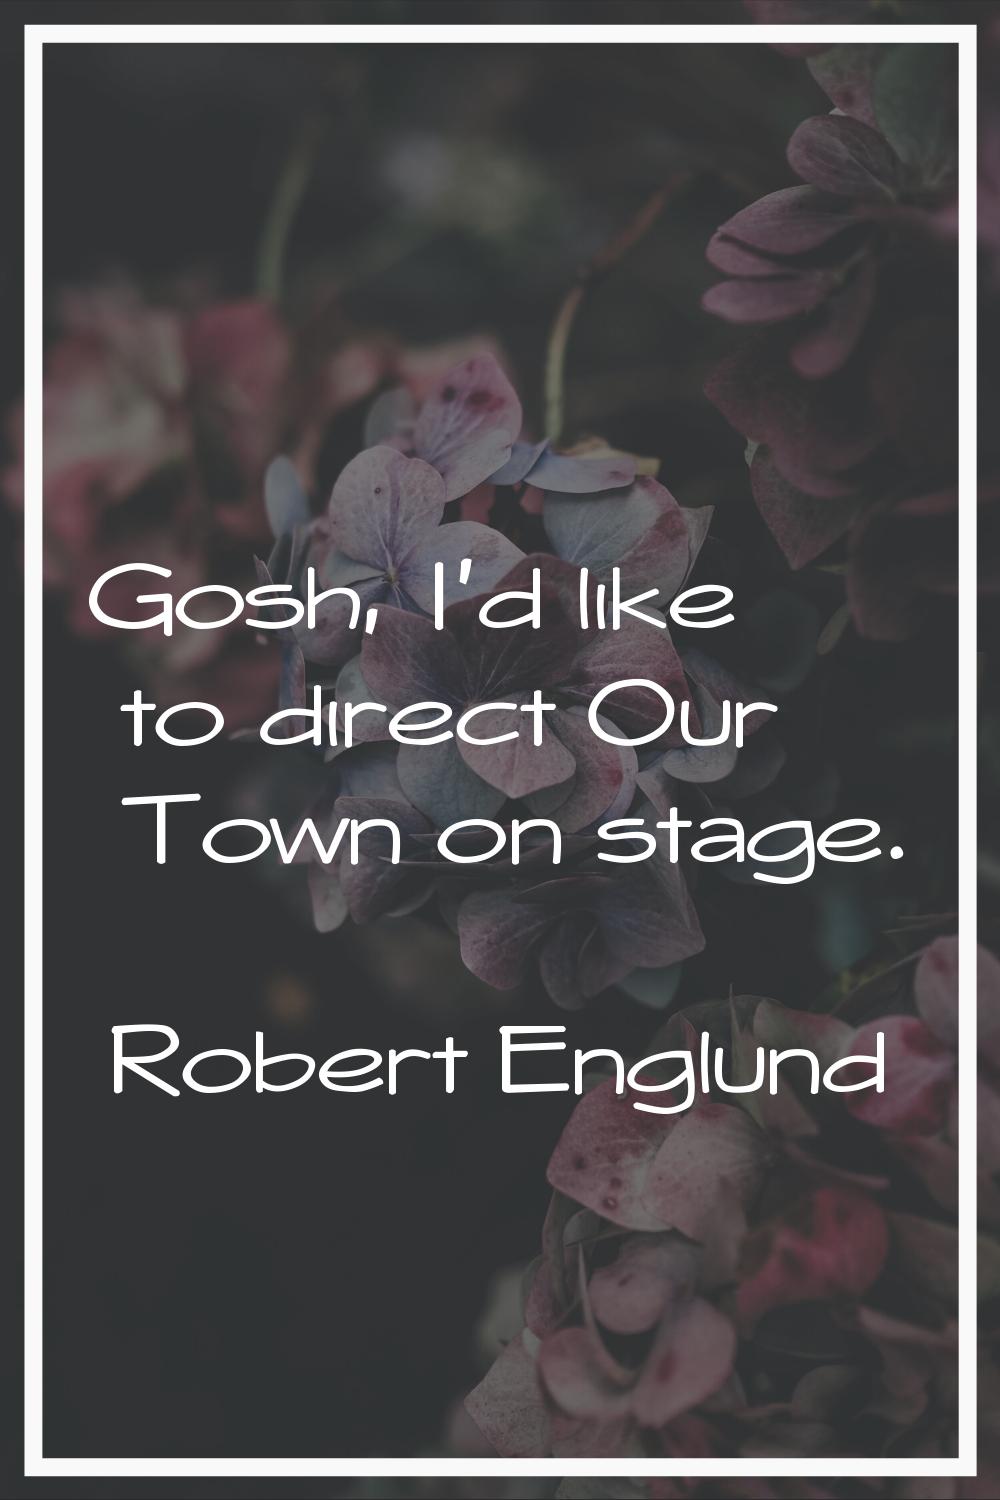 Gosh, I'd like to direct Our Town on stage.